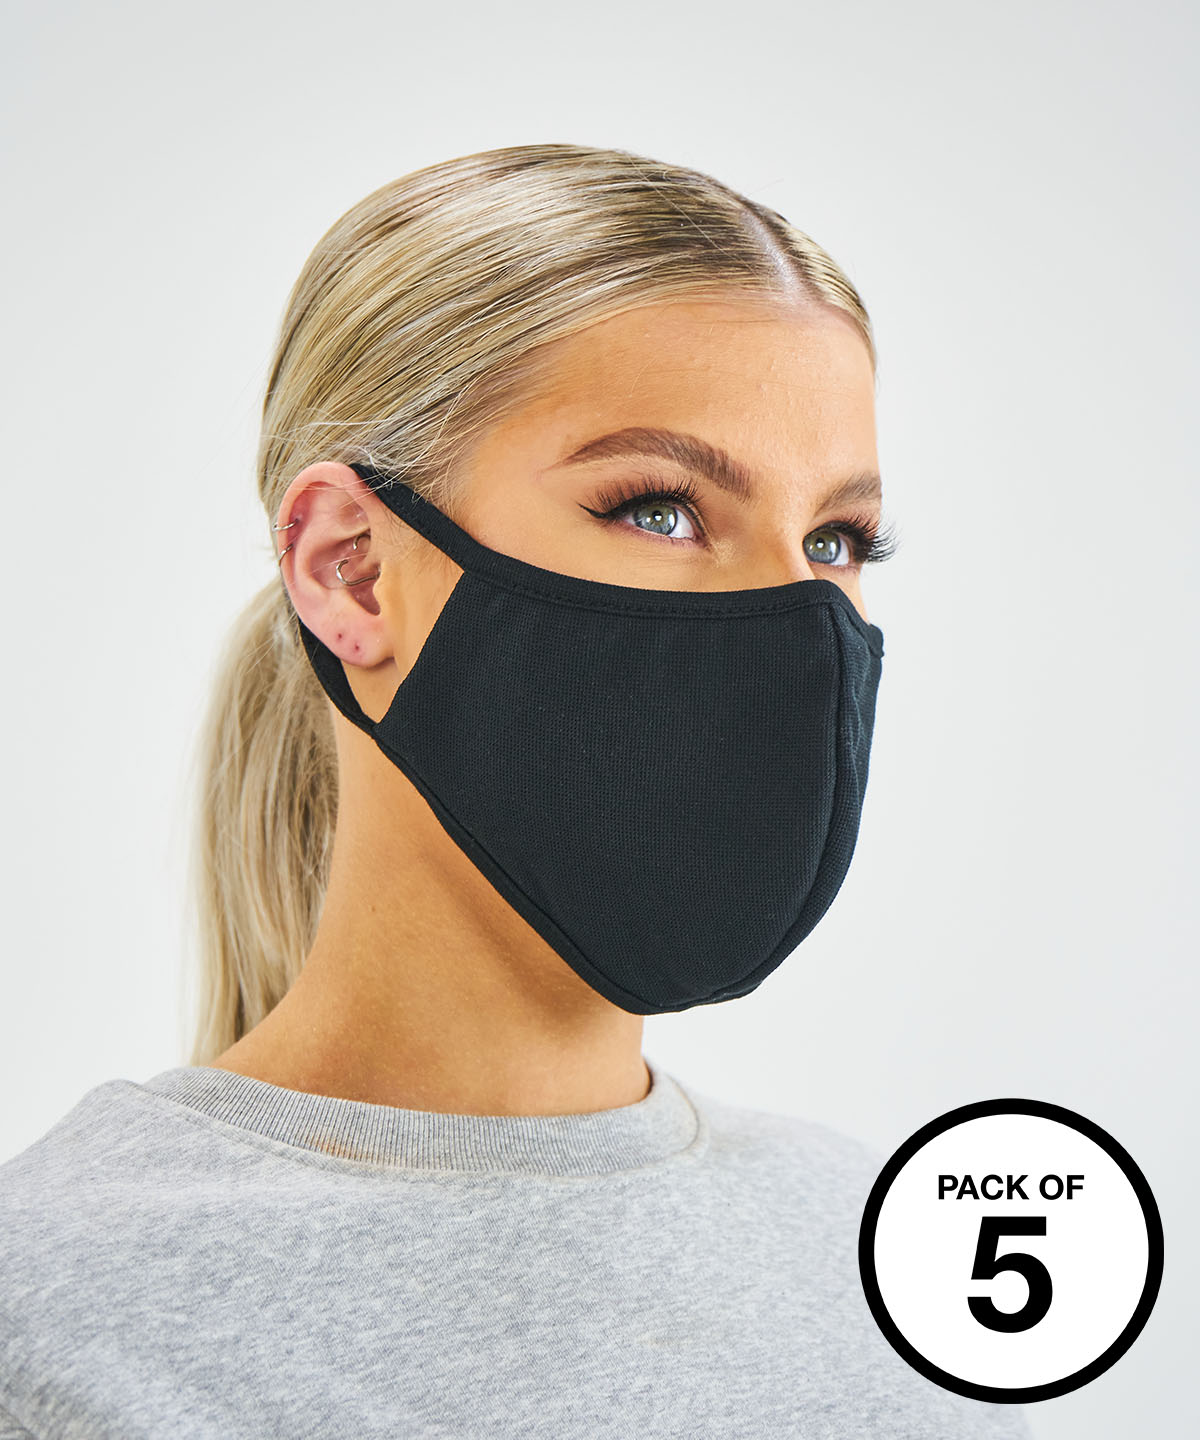 Antimicrobial washable face mask (Pack of 5)